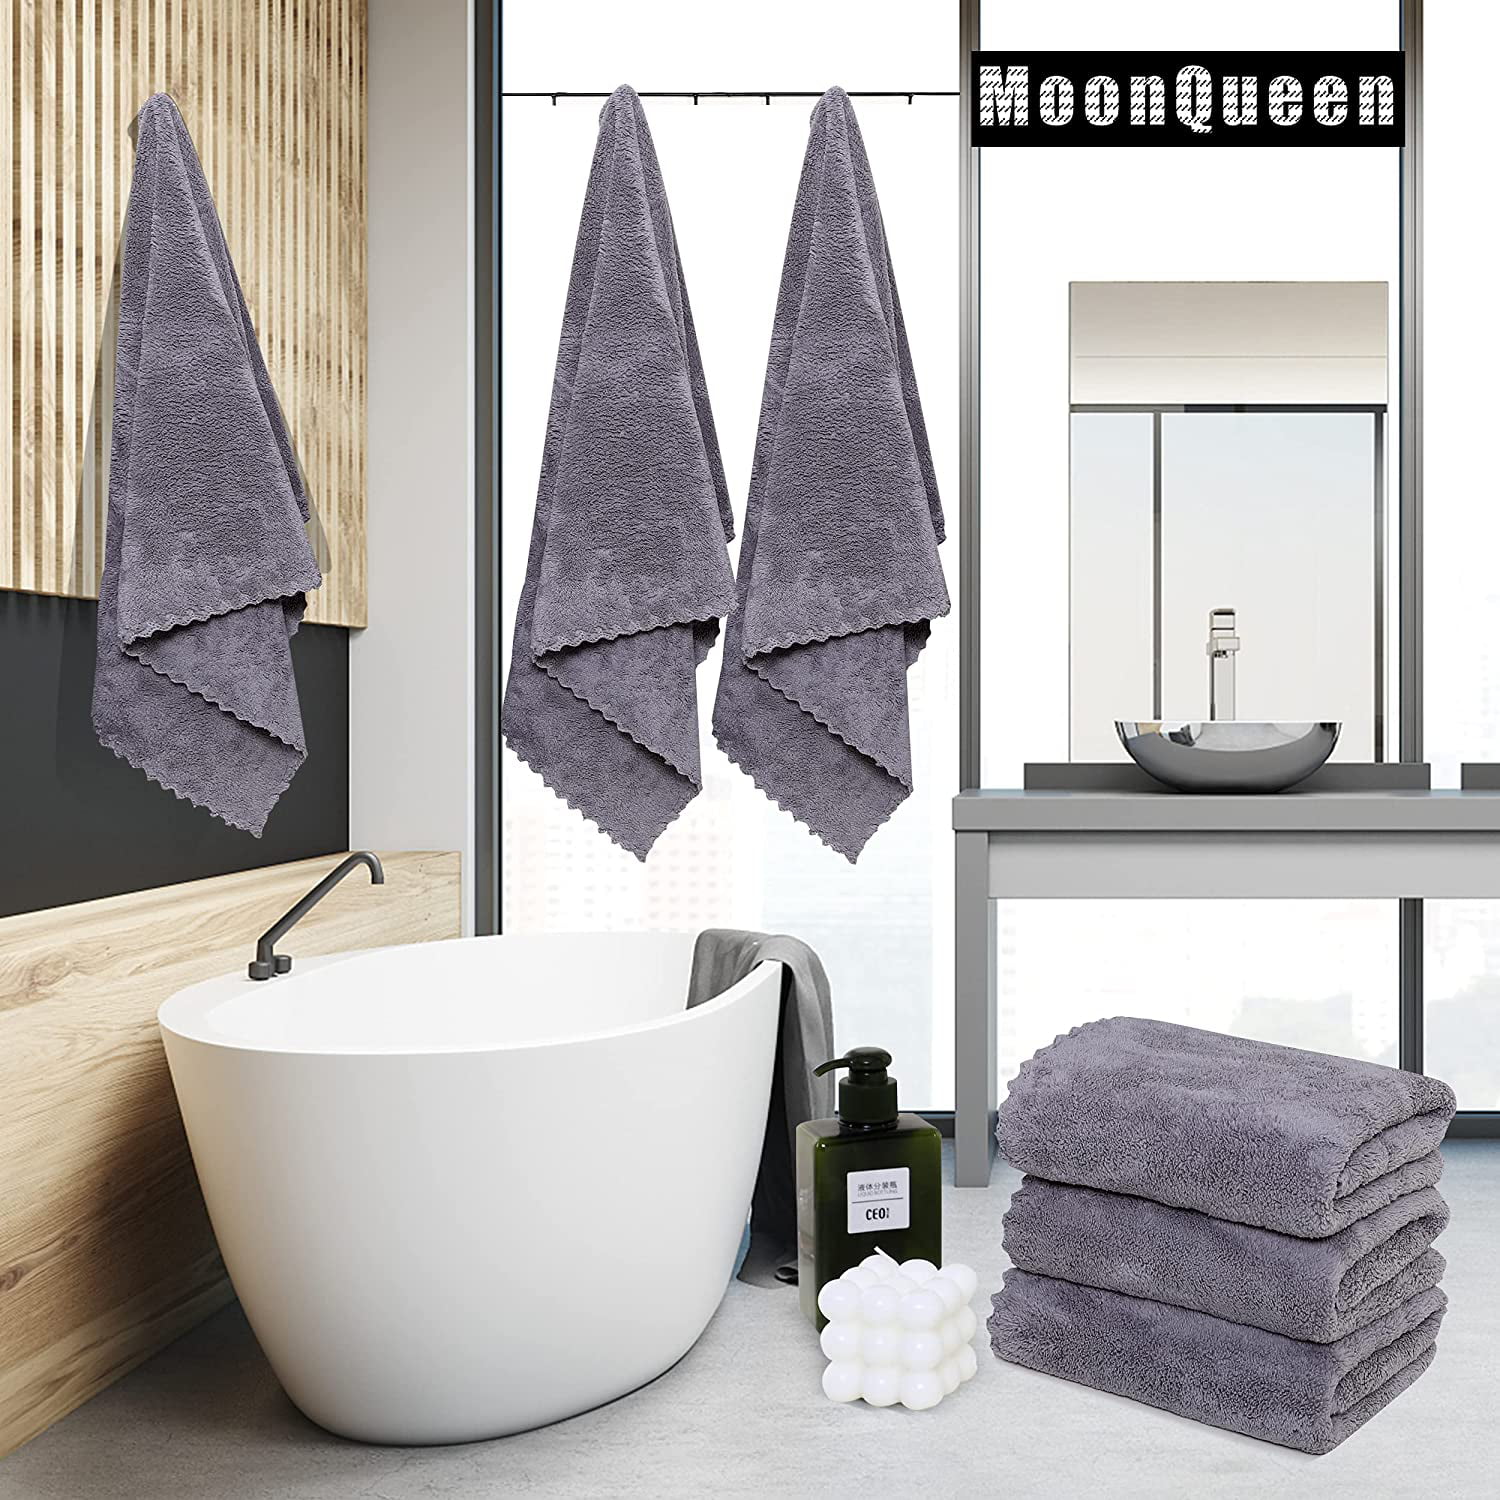 SEISSO Large Bath Towels for Bathroom, 35 x 63 inches Viscose Made